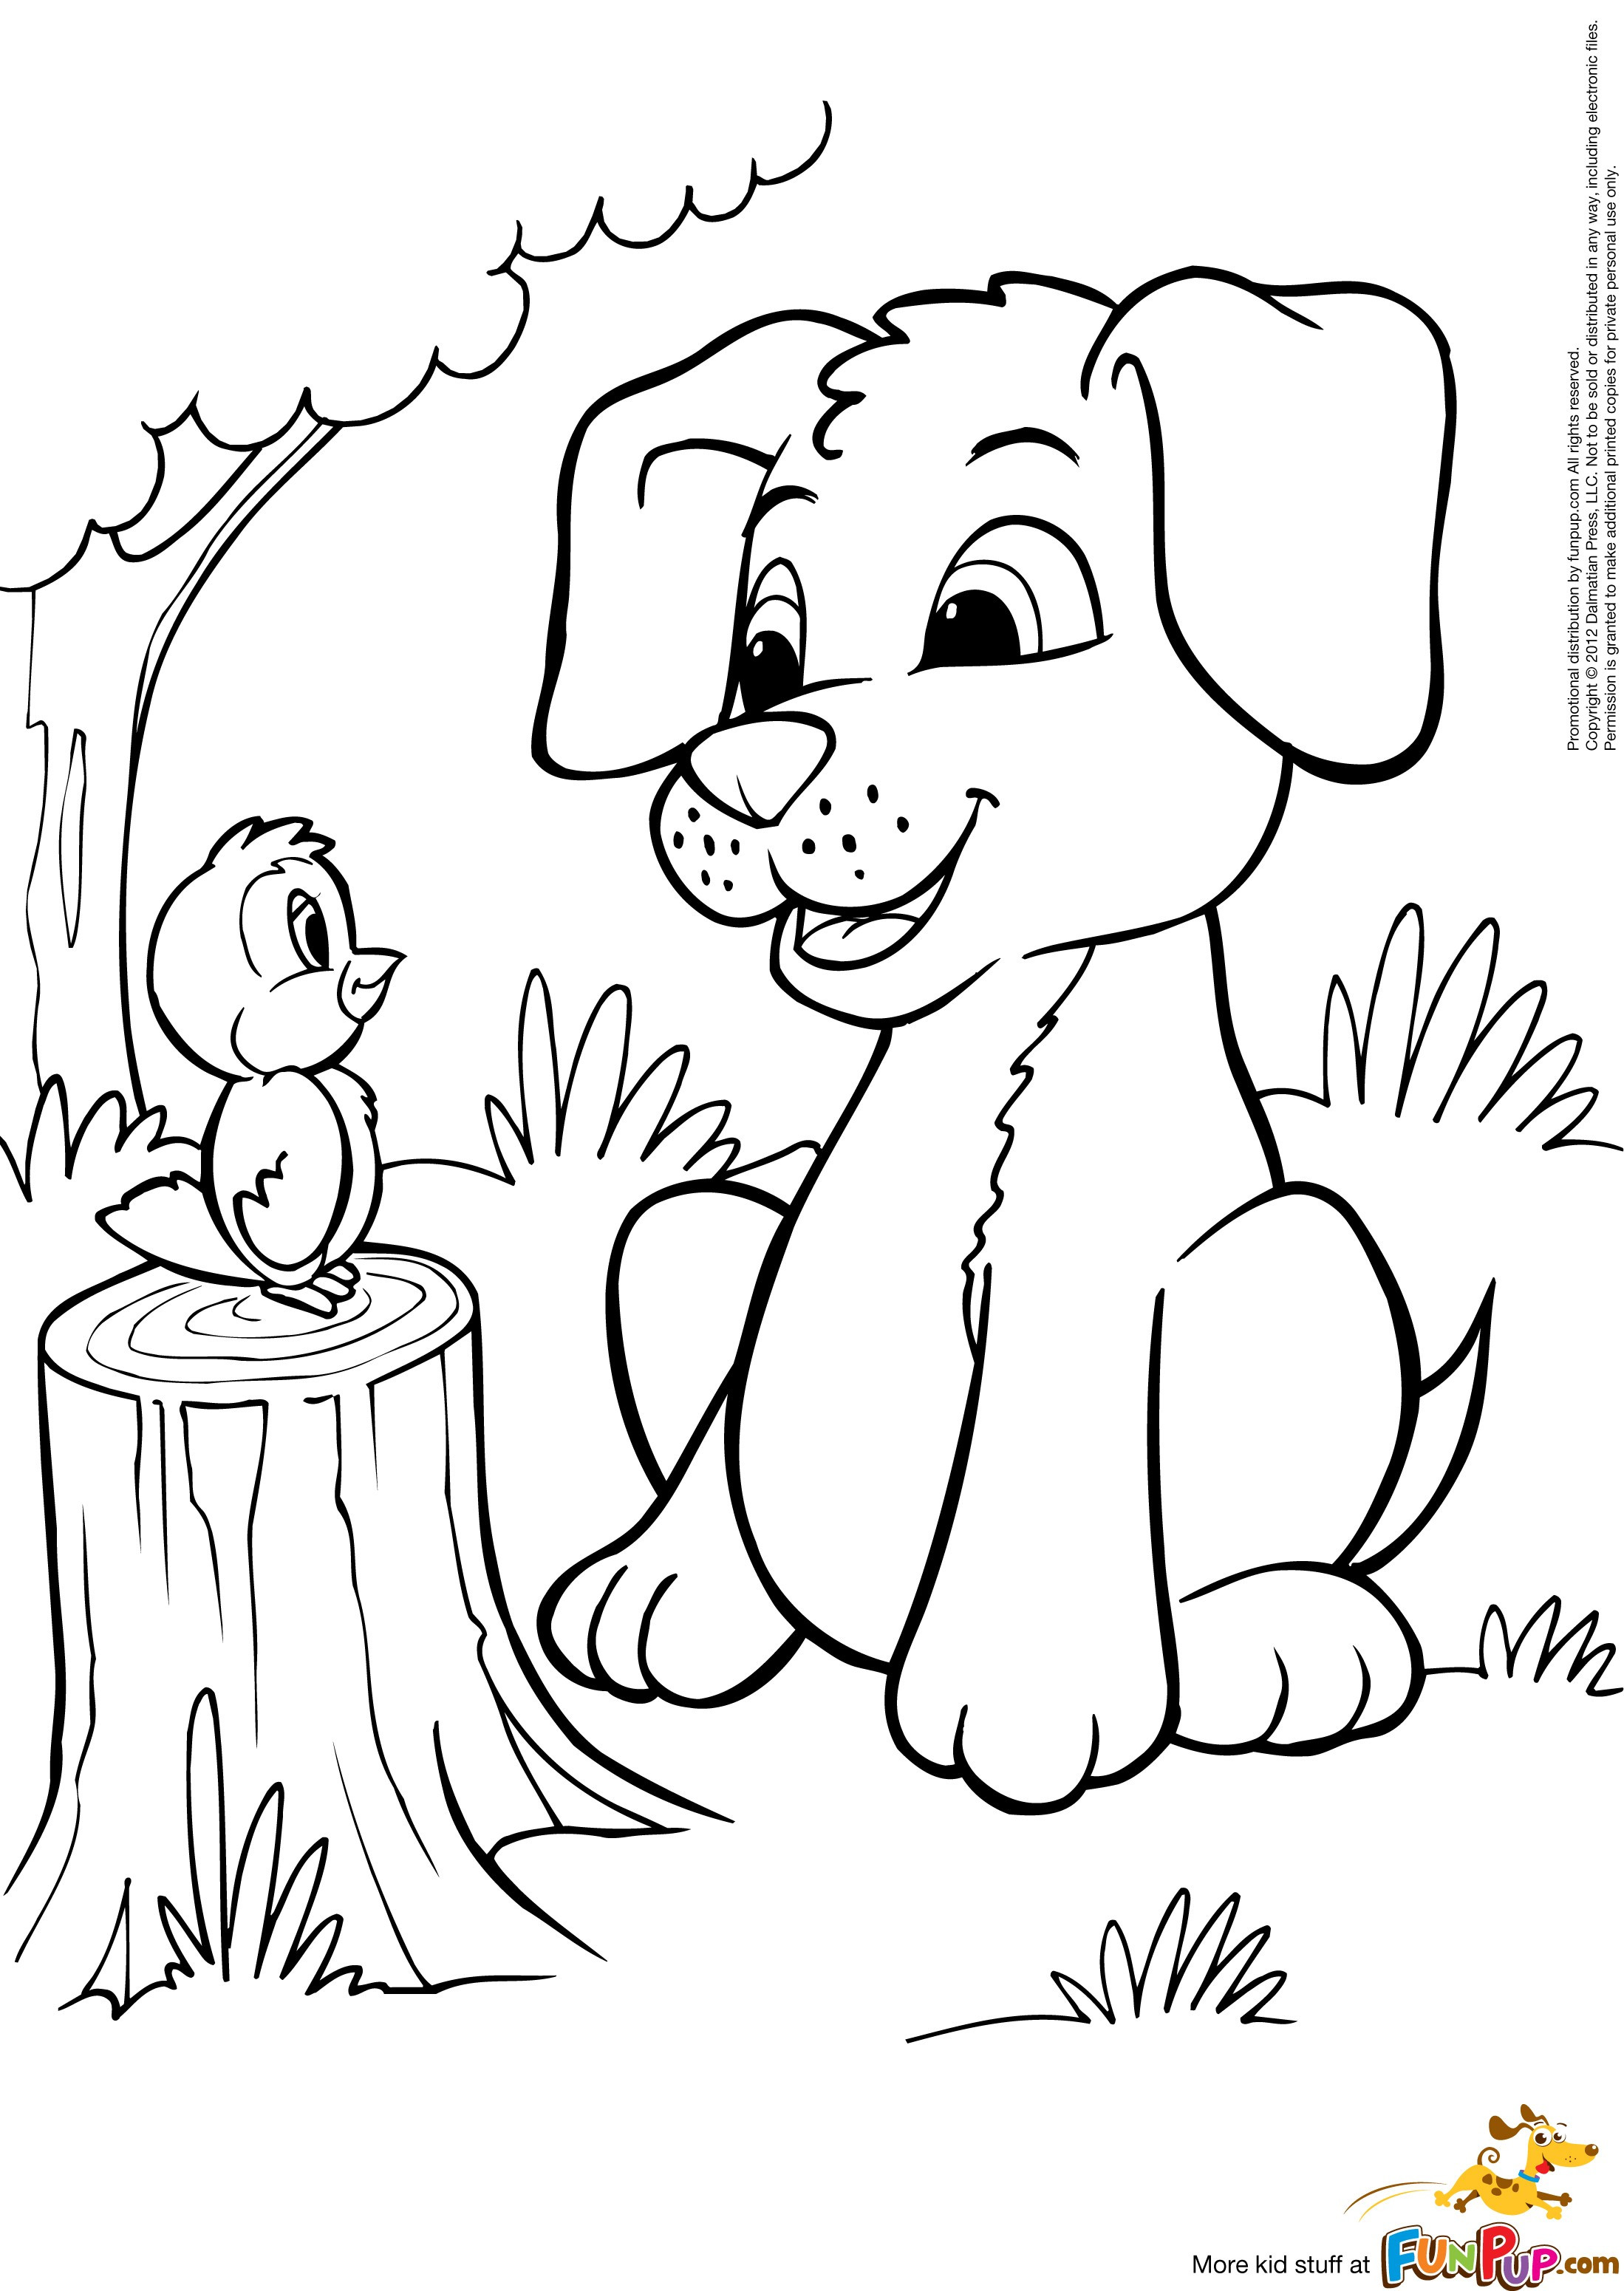 puppy free coloring pages